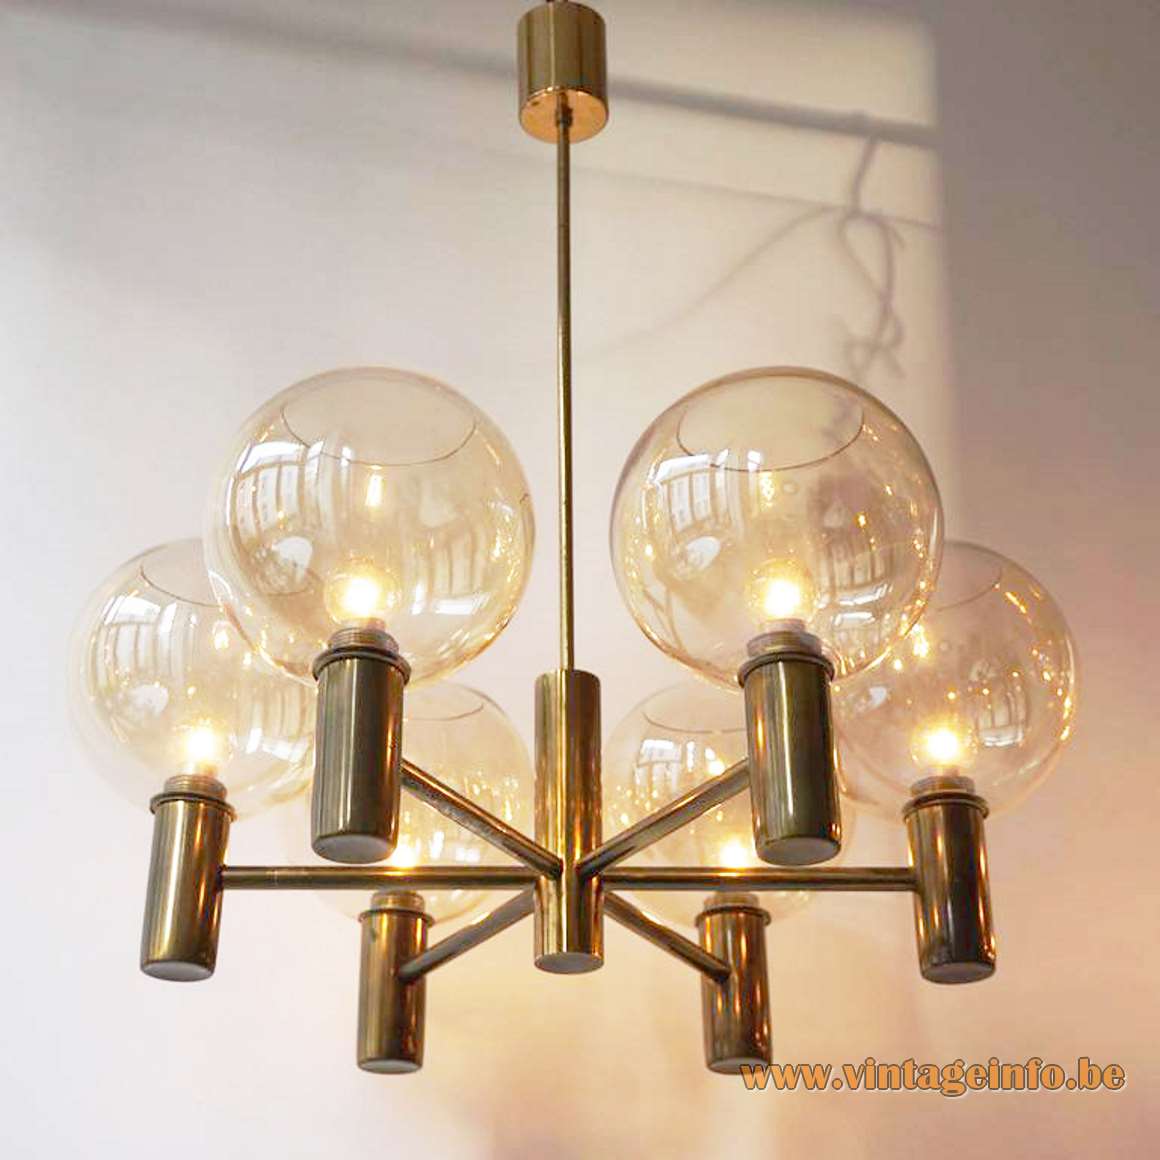 Hans-Agne Jakobsson smoked globes chandelier 6 clear glass spheres brass tubes rods frame 1960s 1970s